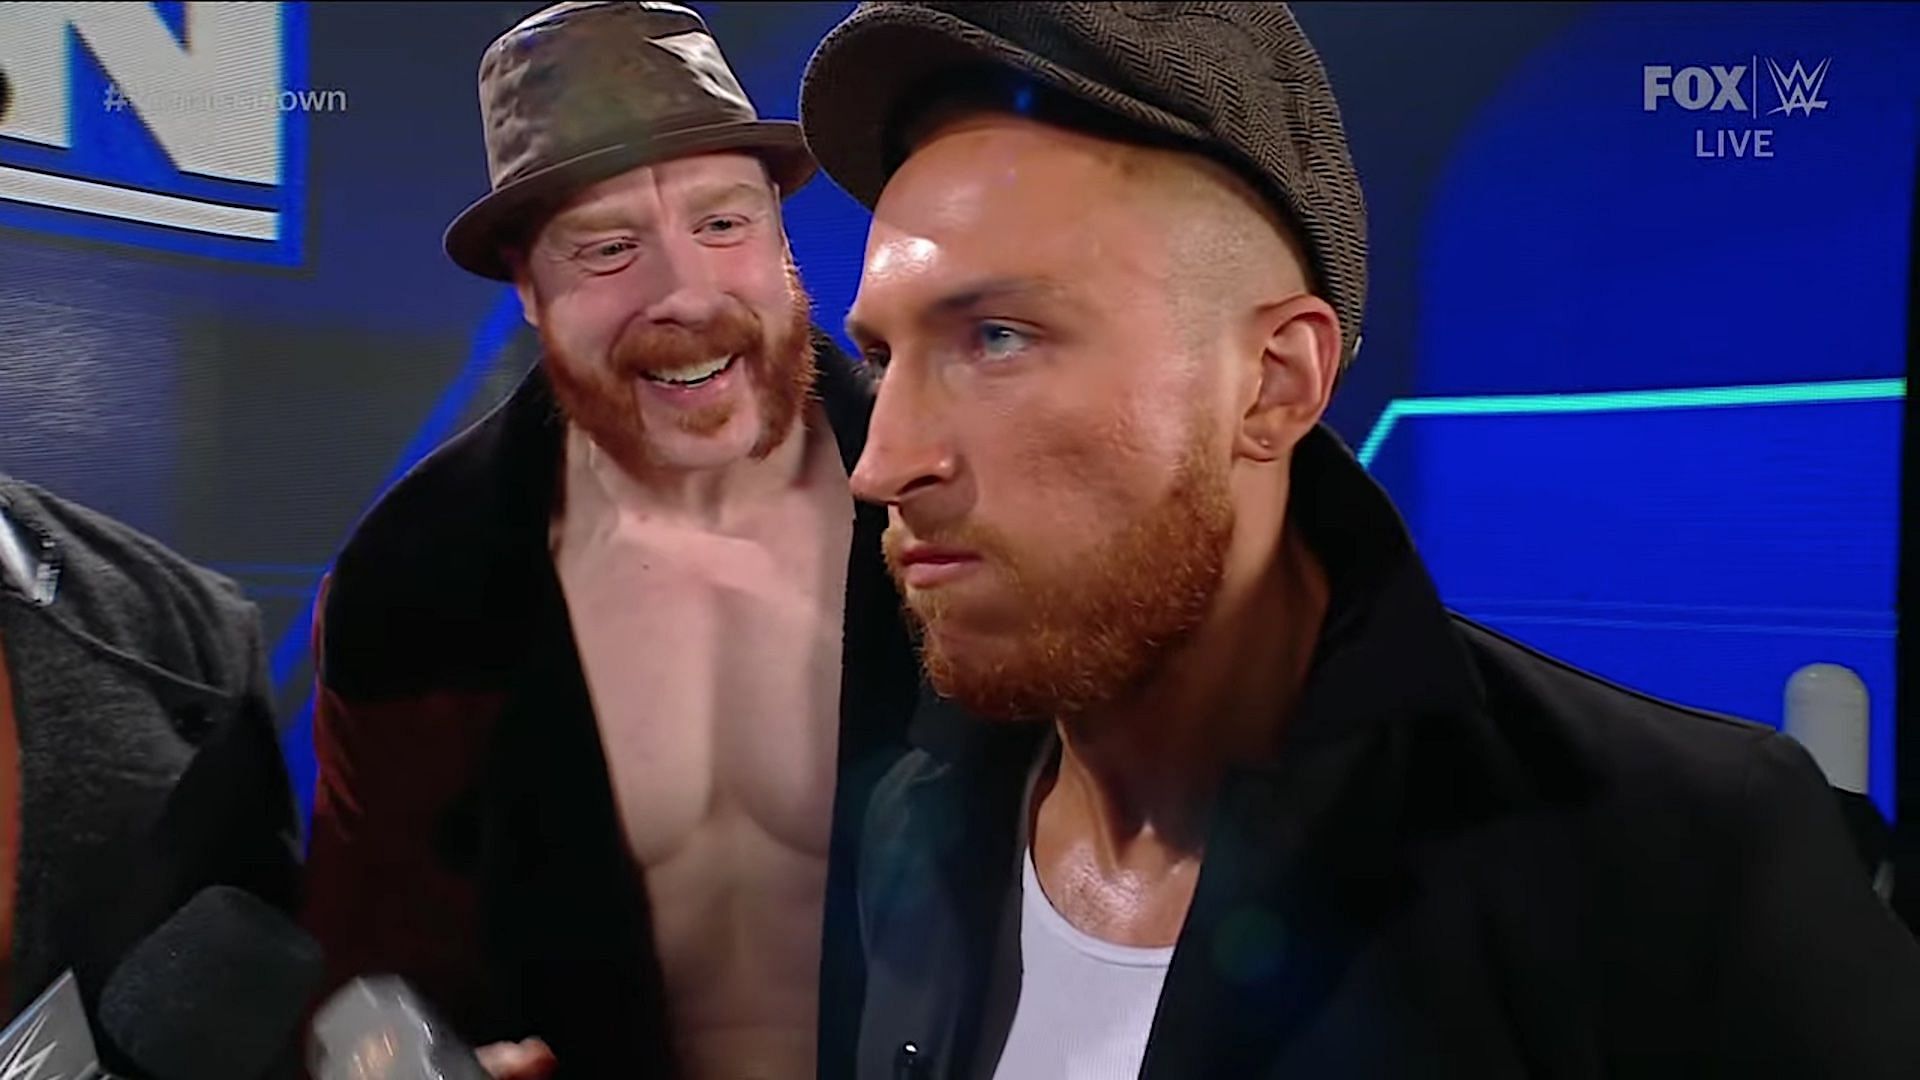 Is Sheamus&#039; group a nod to Peaky Blinders or some other group?